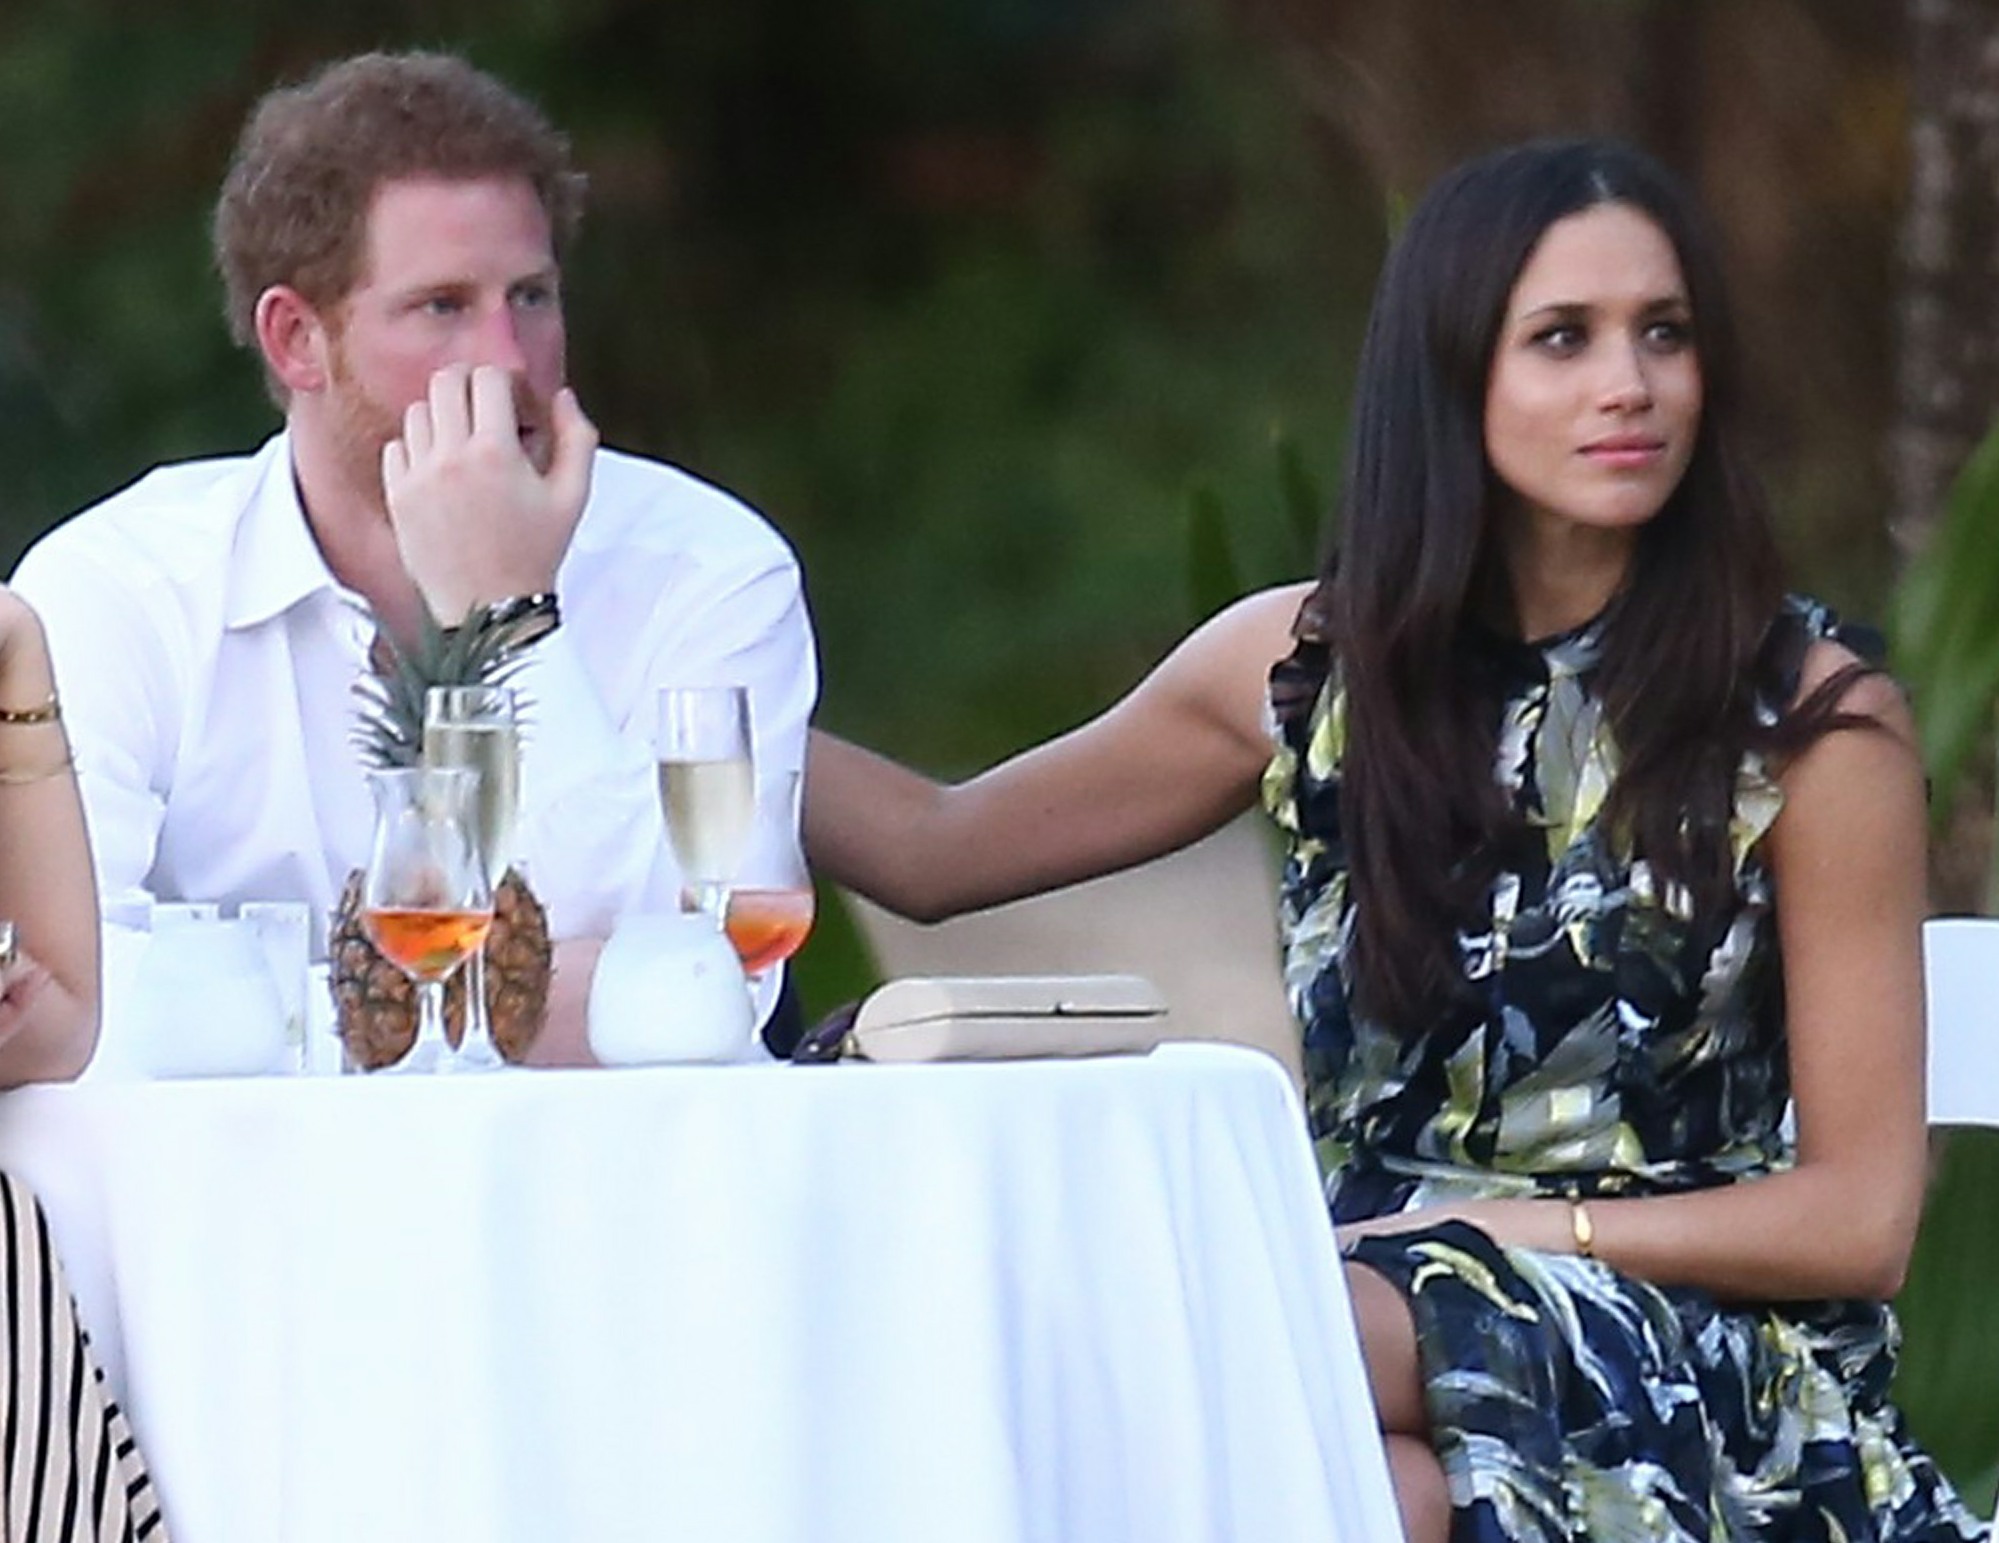 Prince Harry And Meghan Markle Attend A Wedding In Jamaica